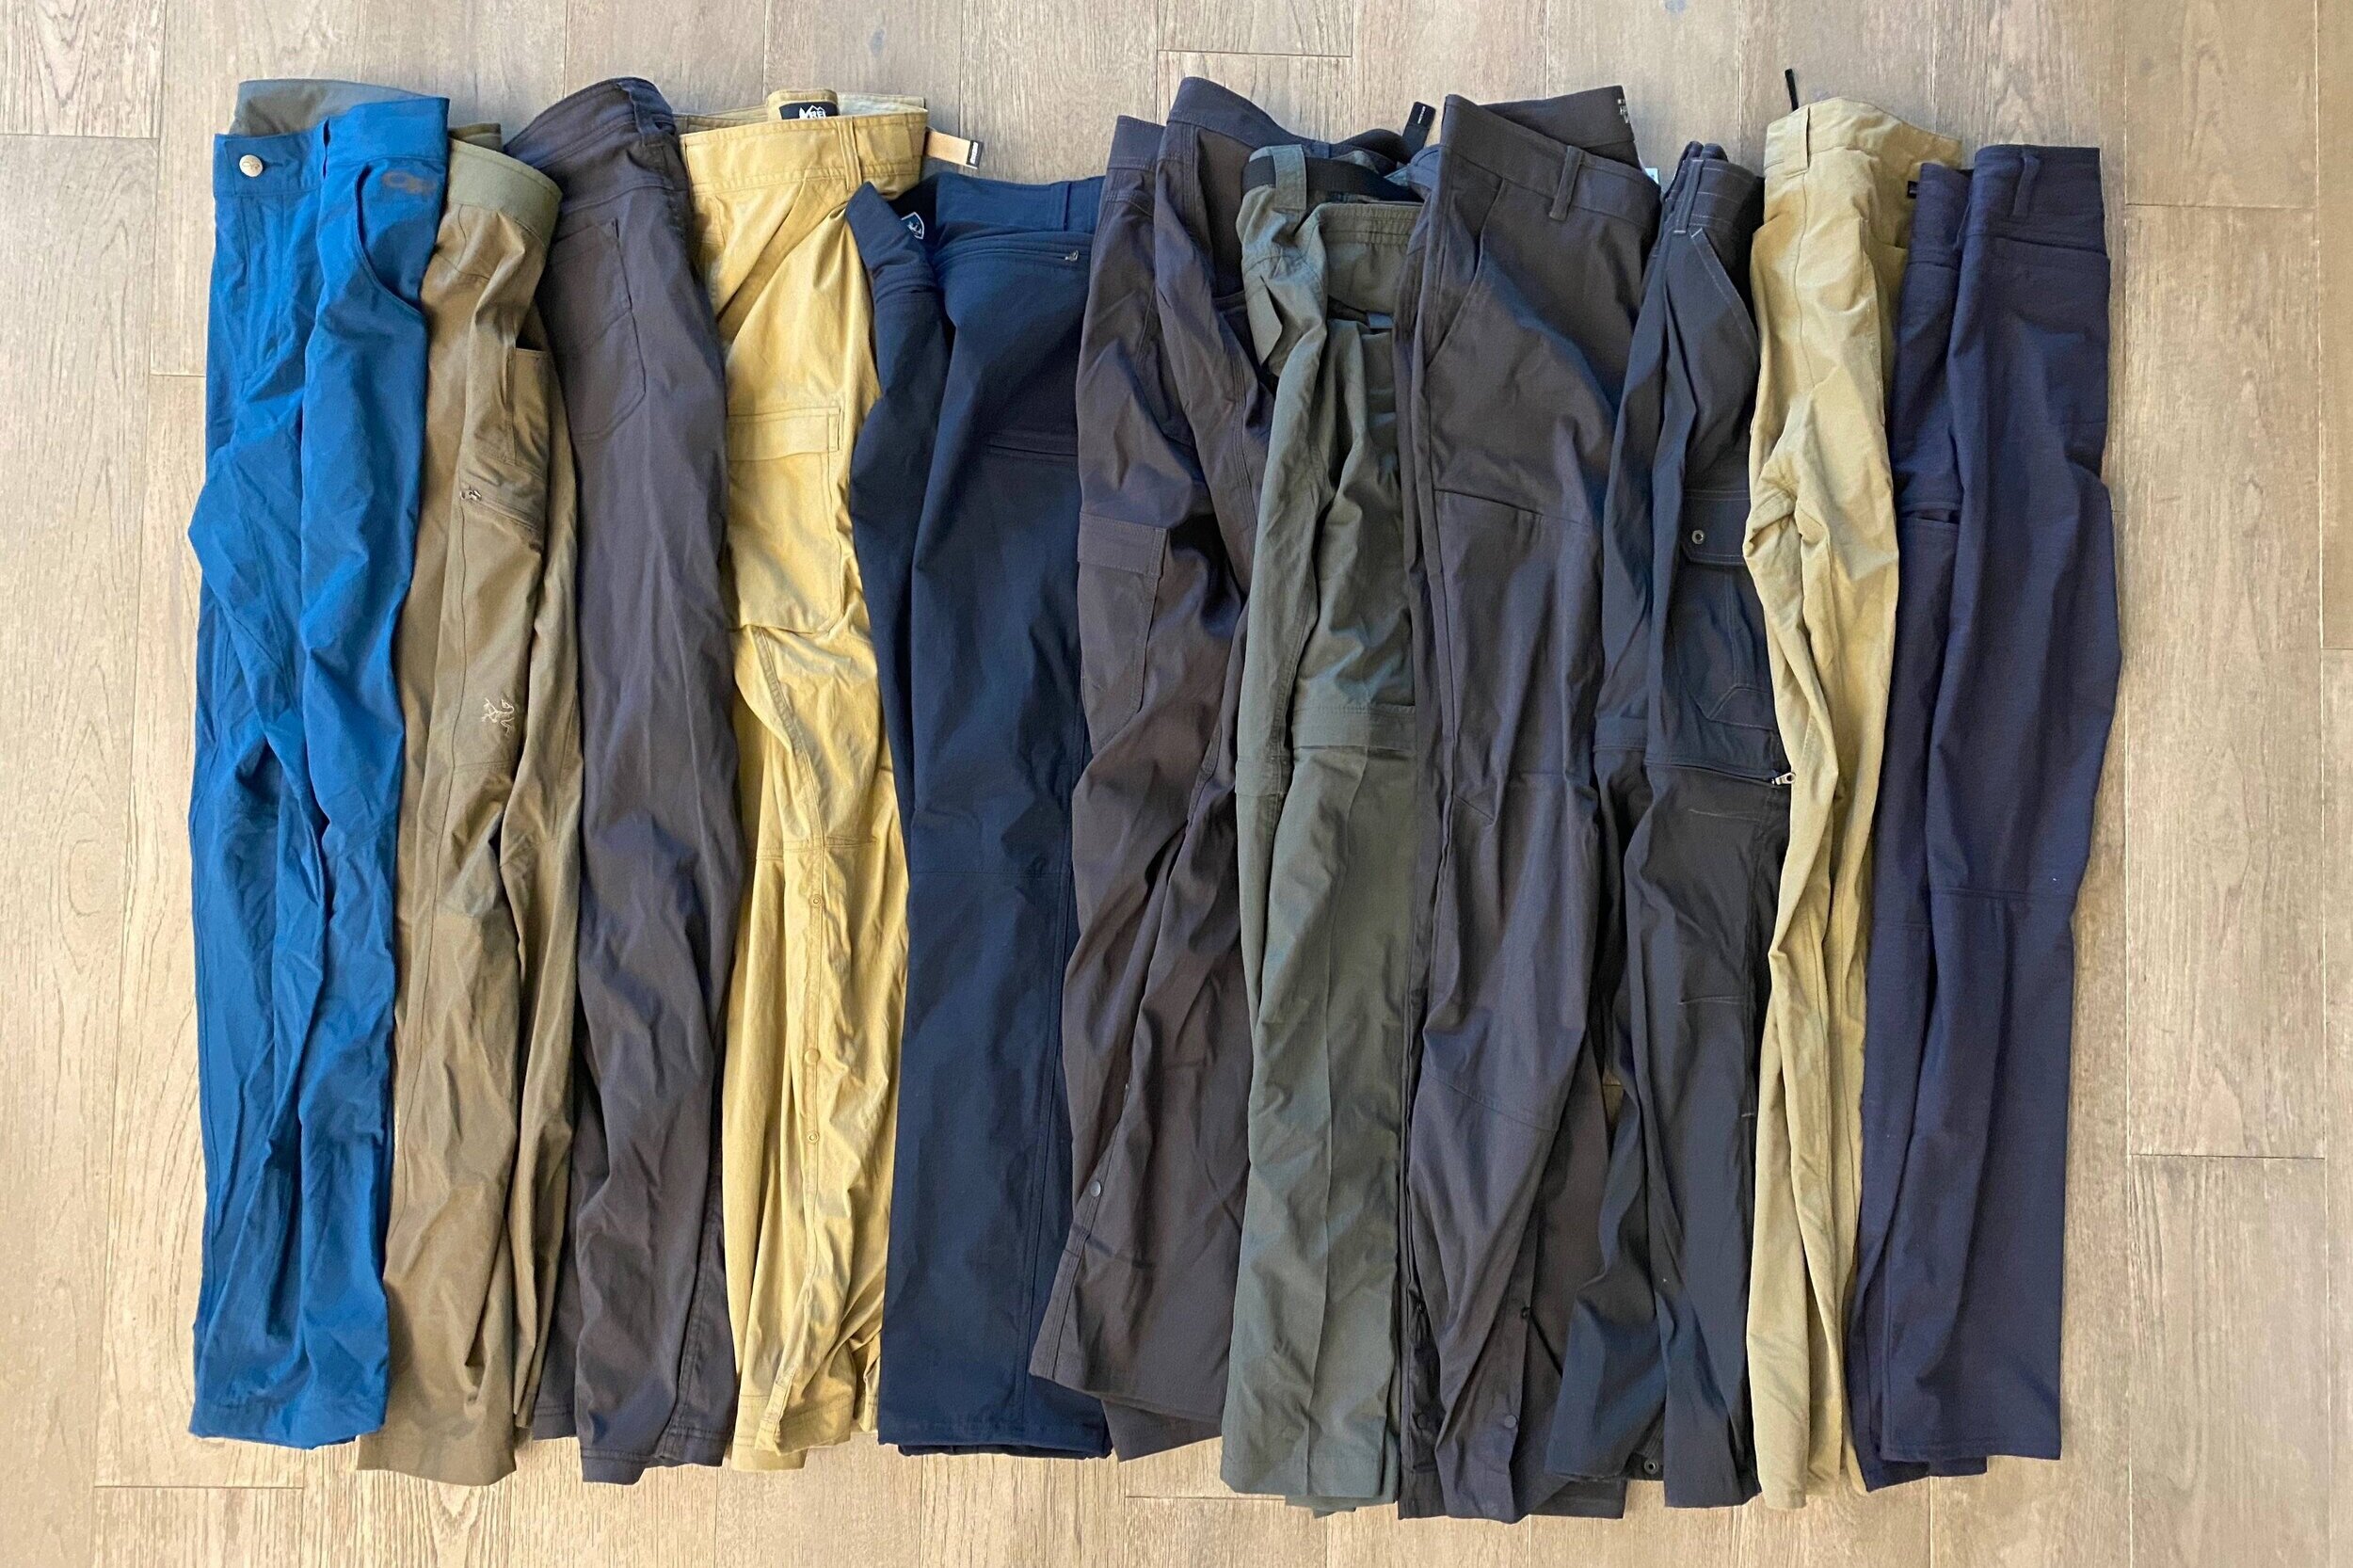 We own and use all the hiking pants we recommend.